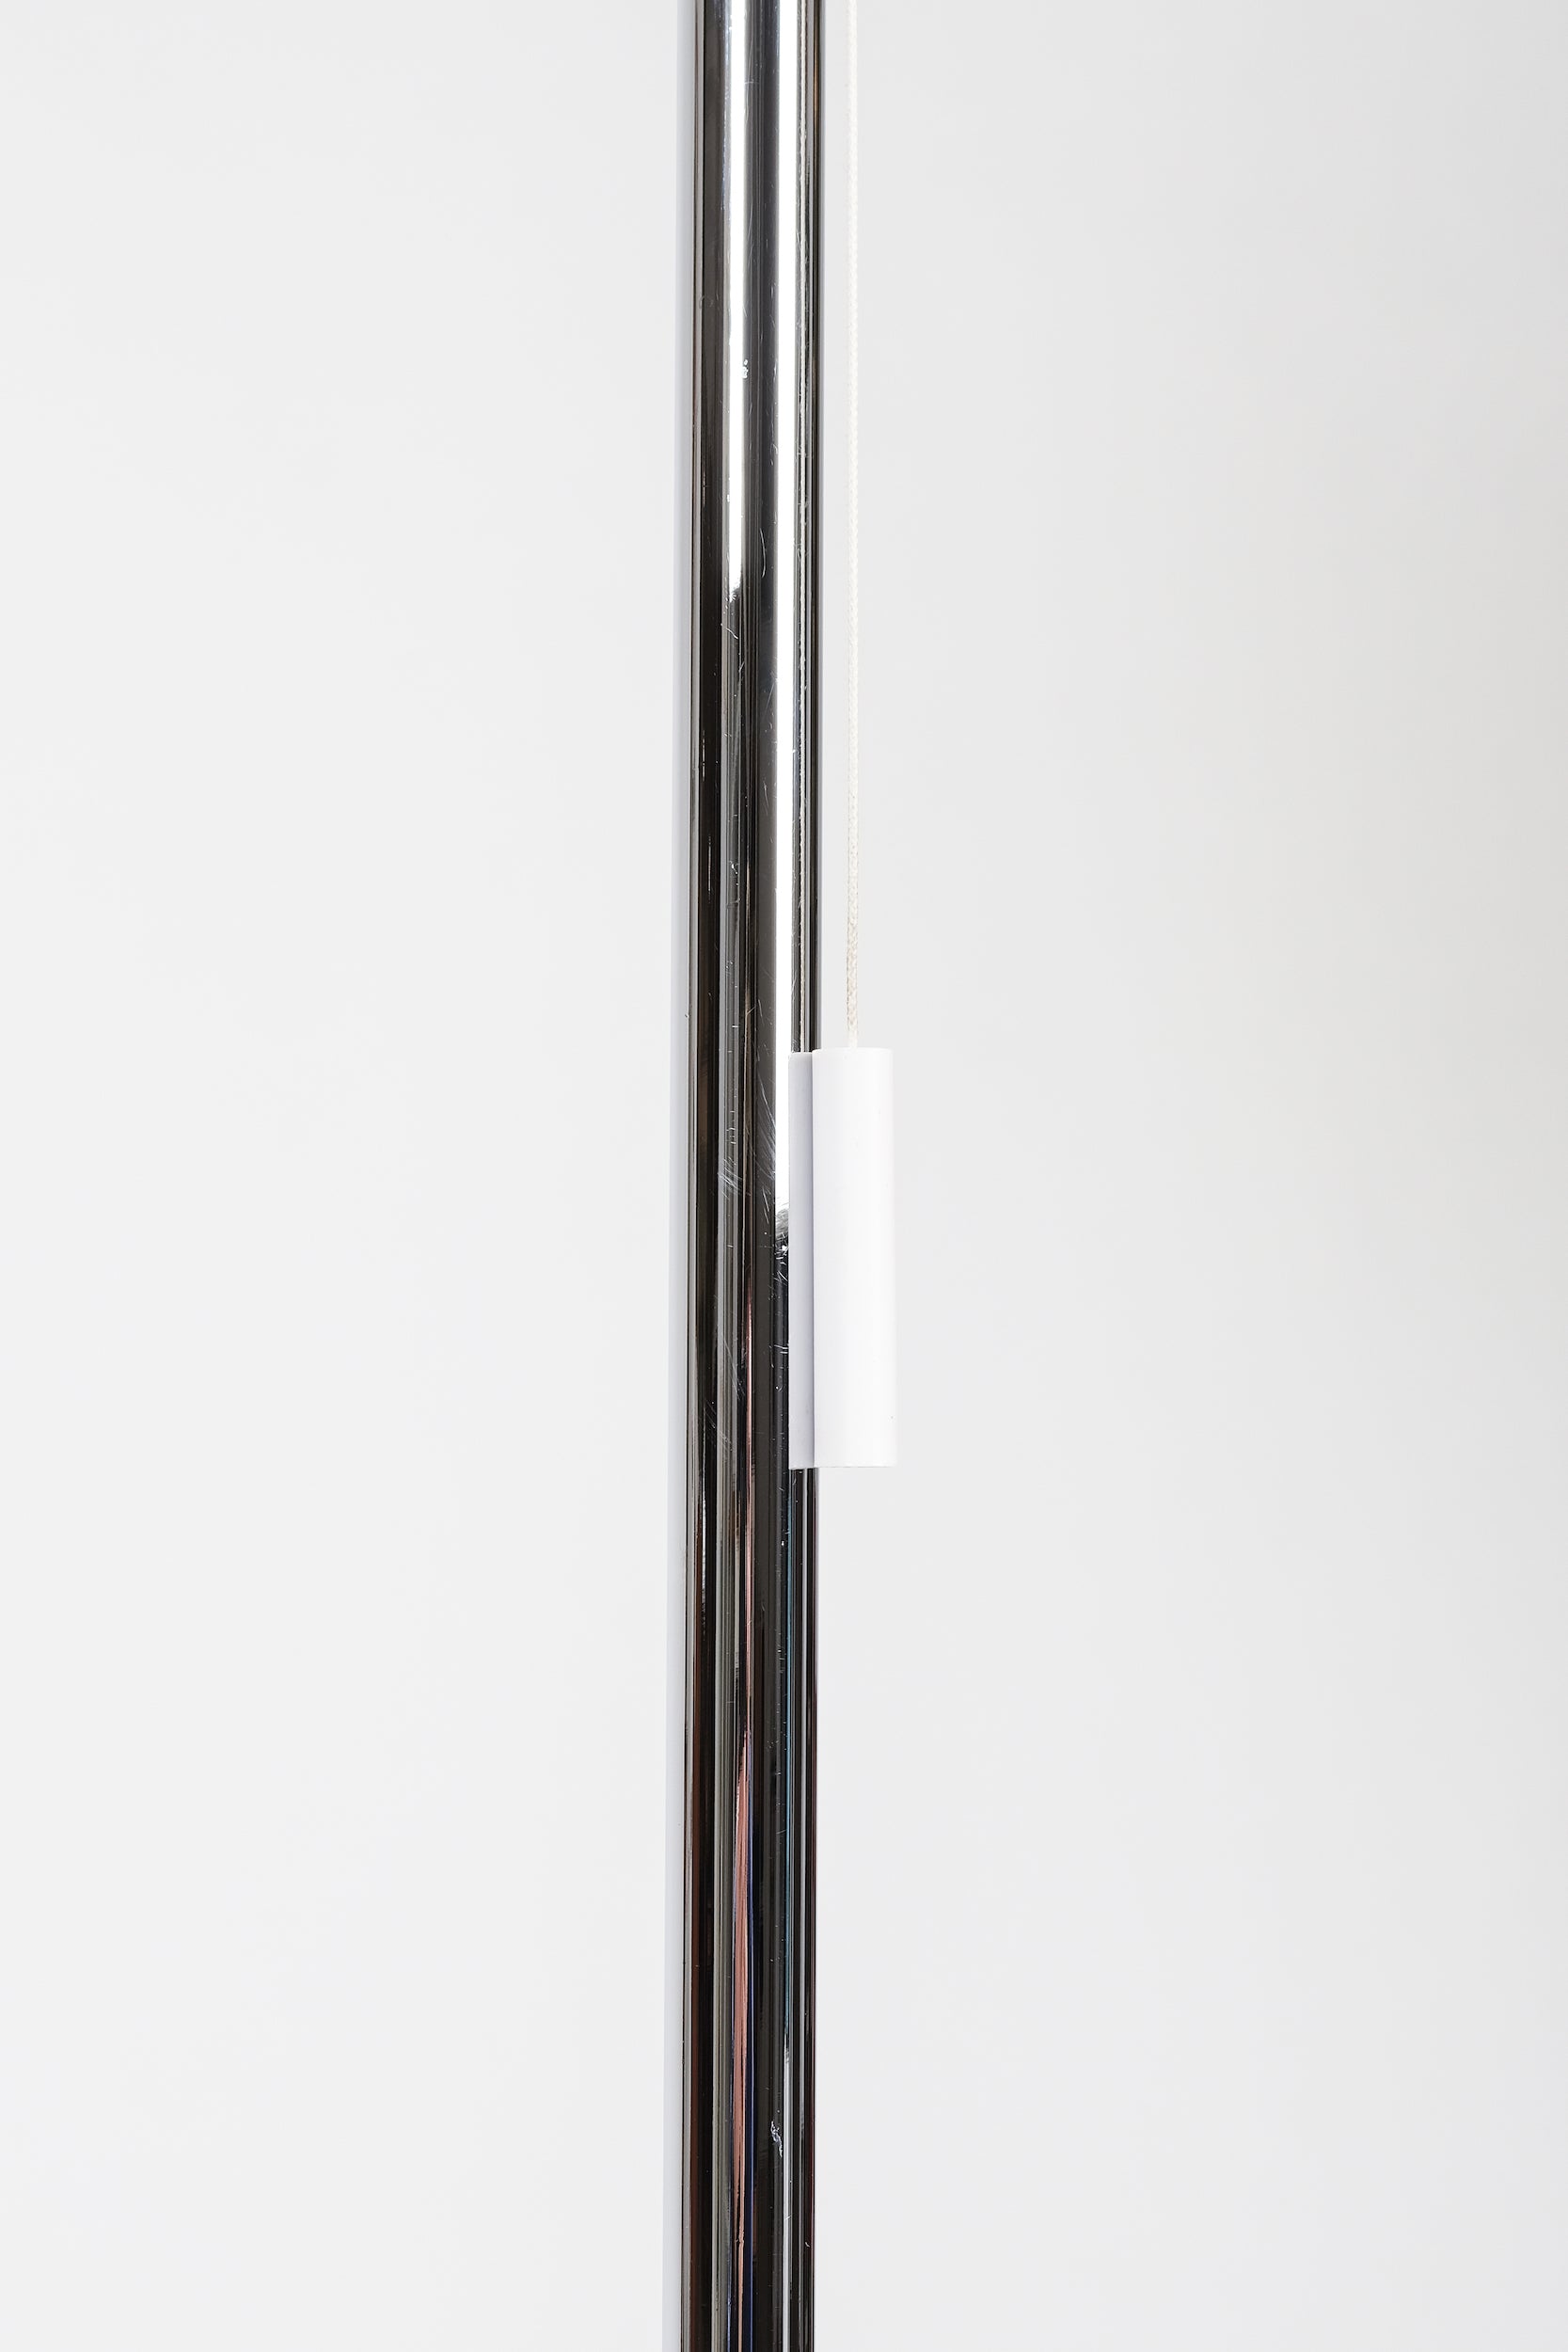 Floor Lamp, Chrome with Parchment Screen, Mégal, 70s